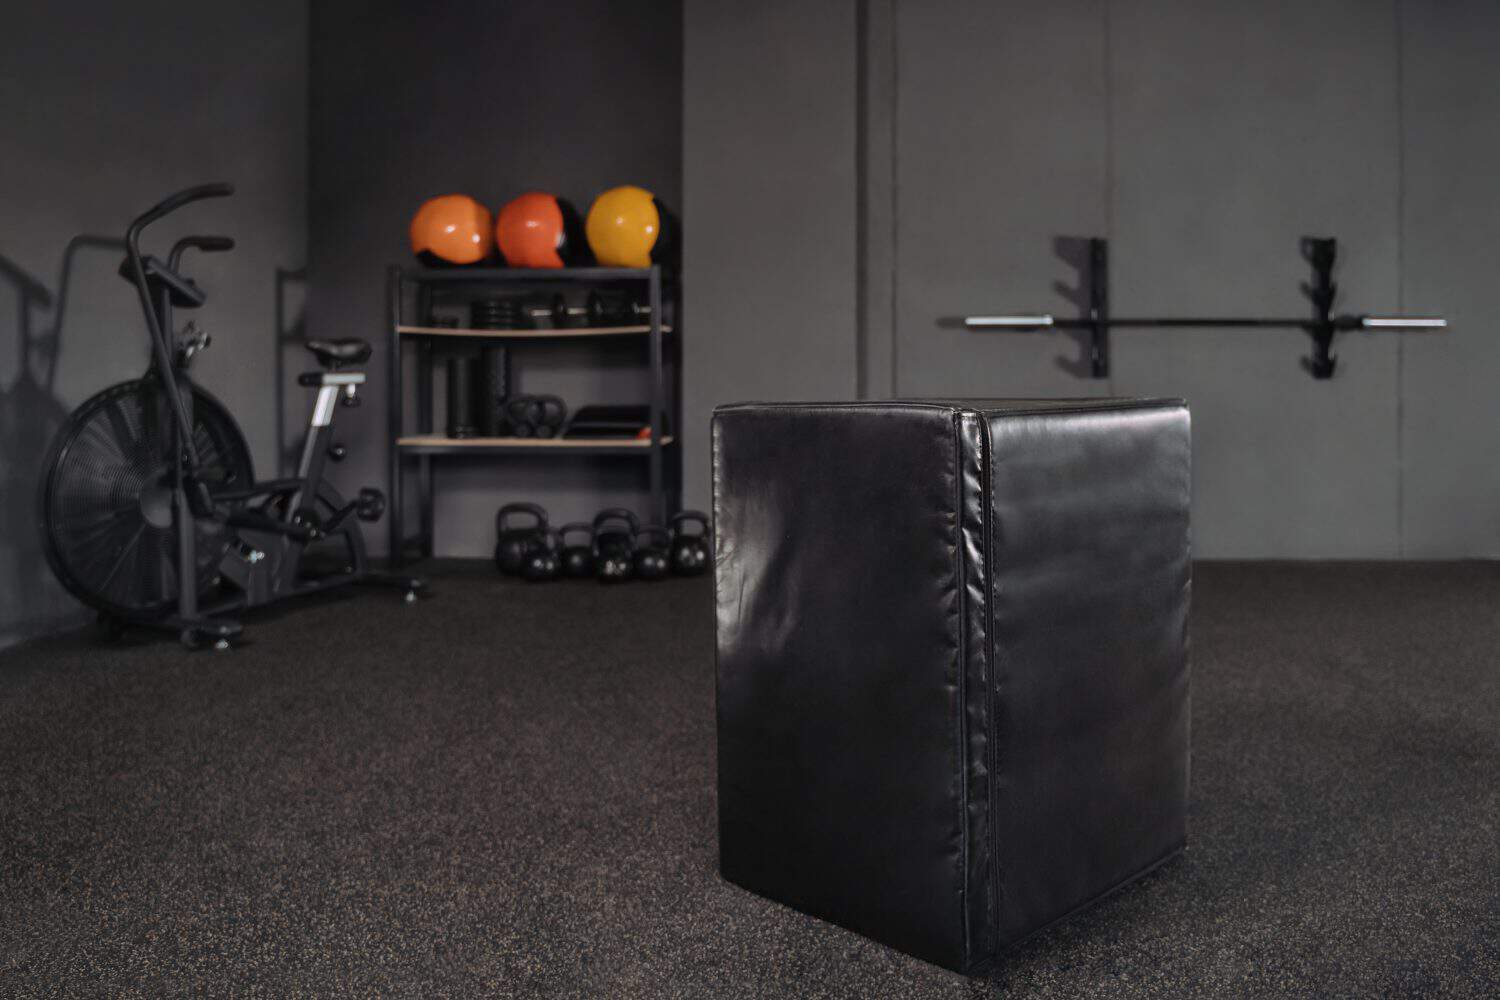 Functional training, workout and crossfit equipment in dark empty gym. Training exercising space interior with modern sports equipment. Jumping box in the foreground. Copy space